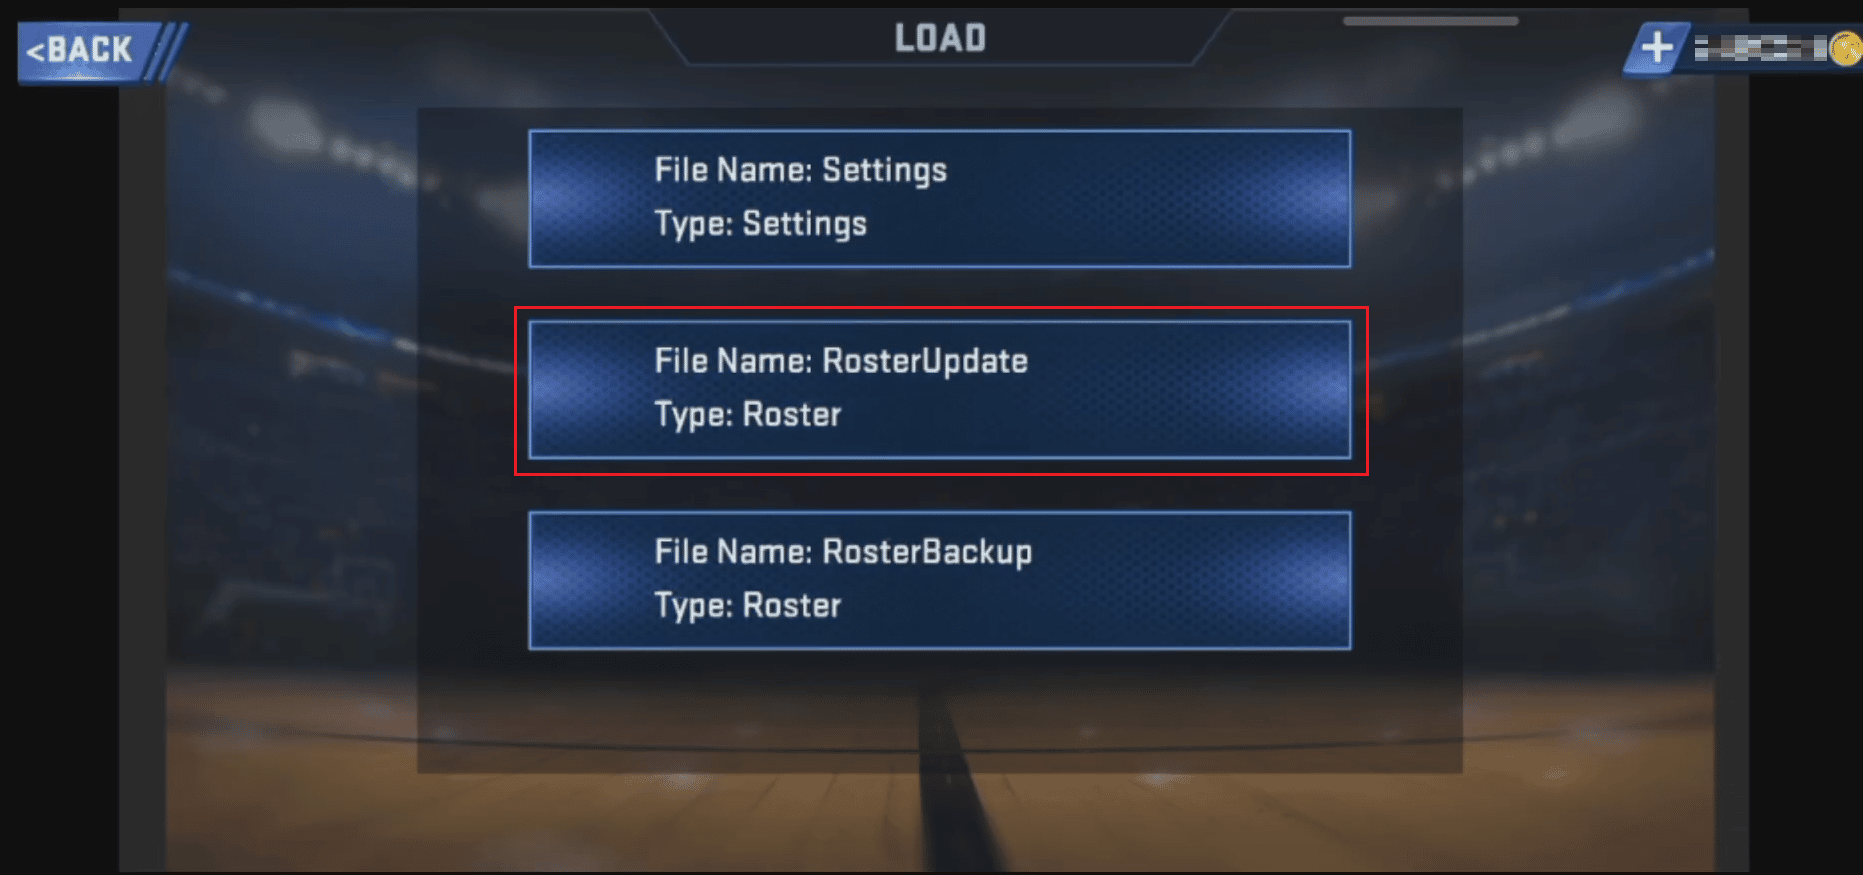 Tap on the RosterUpdate file